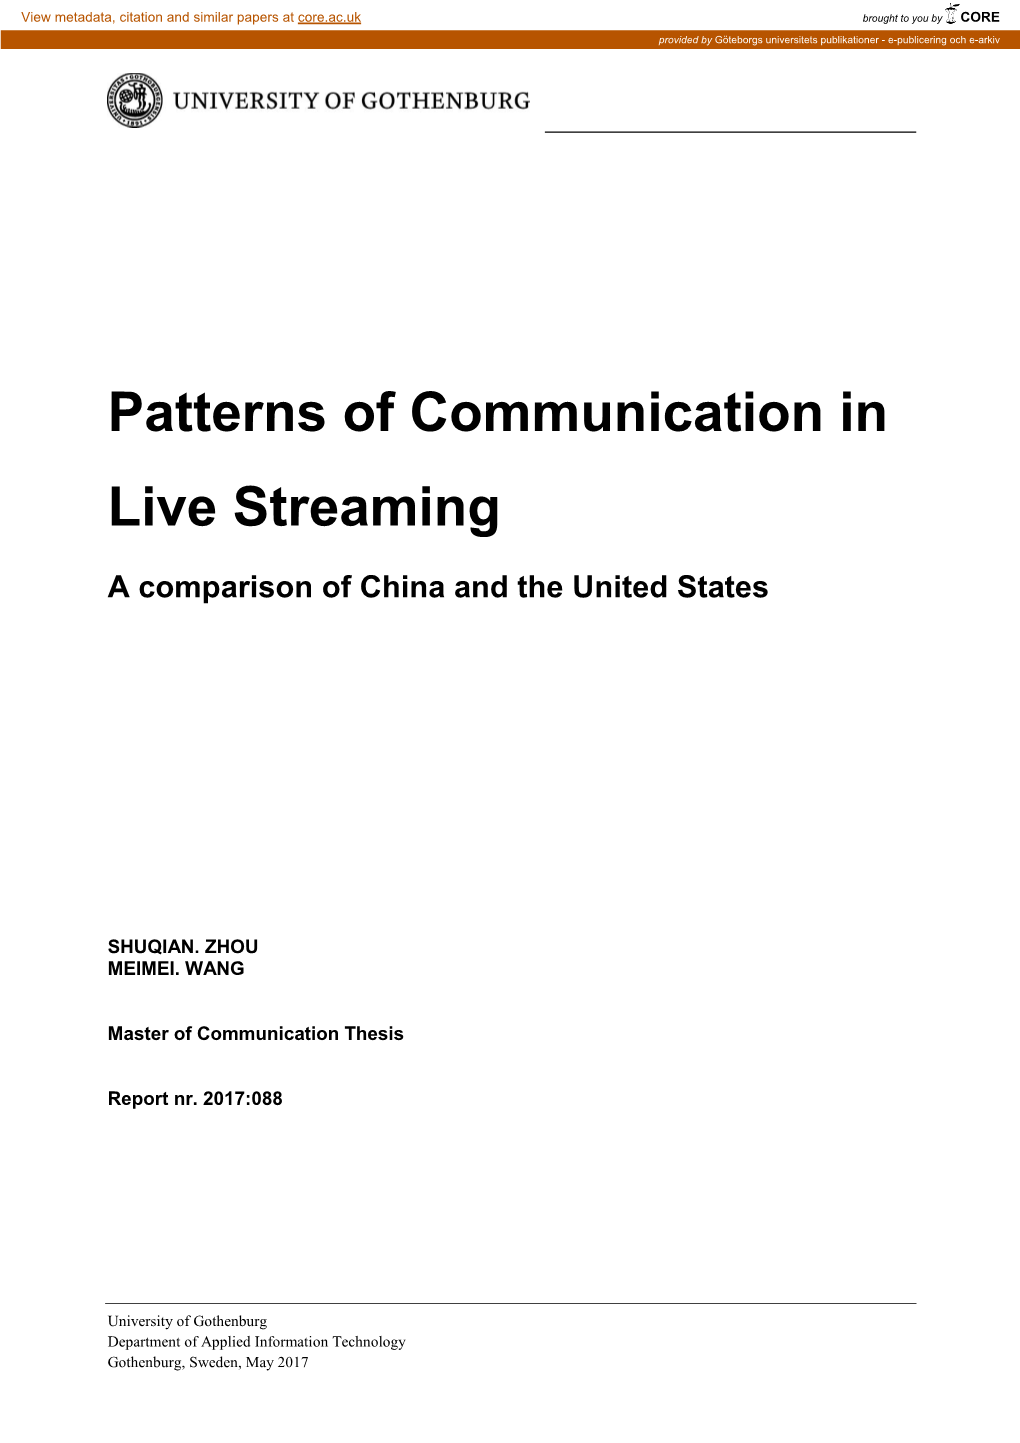 Patterns of Communication in Live Streaming——A Comparison of China and the United States